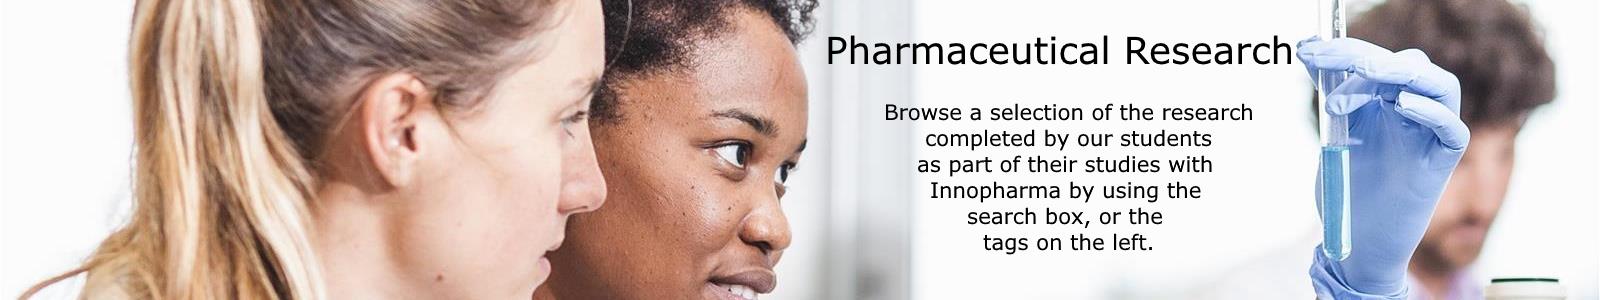 Pharmaceutical Research banner